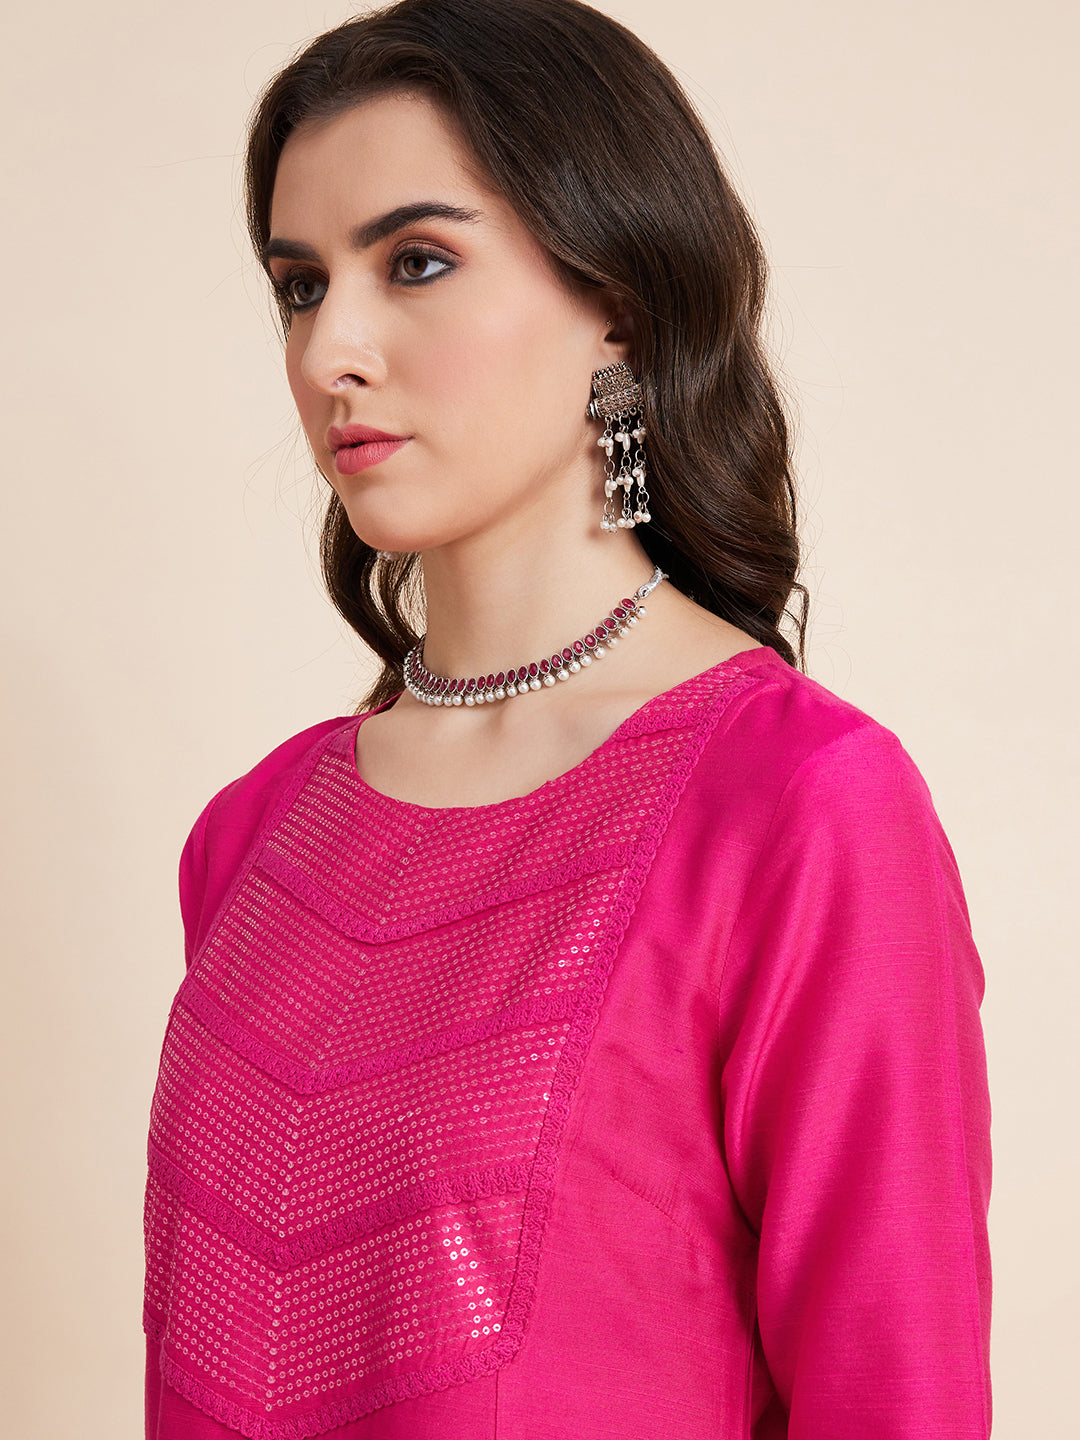 Women Pink Color Embroidery A-line kurta